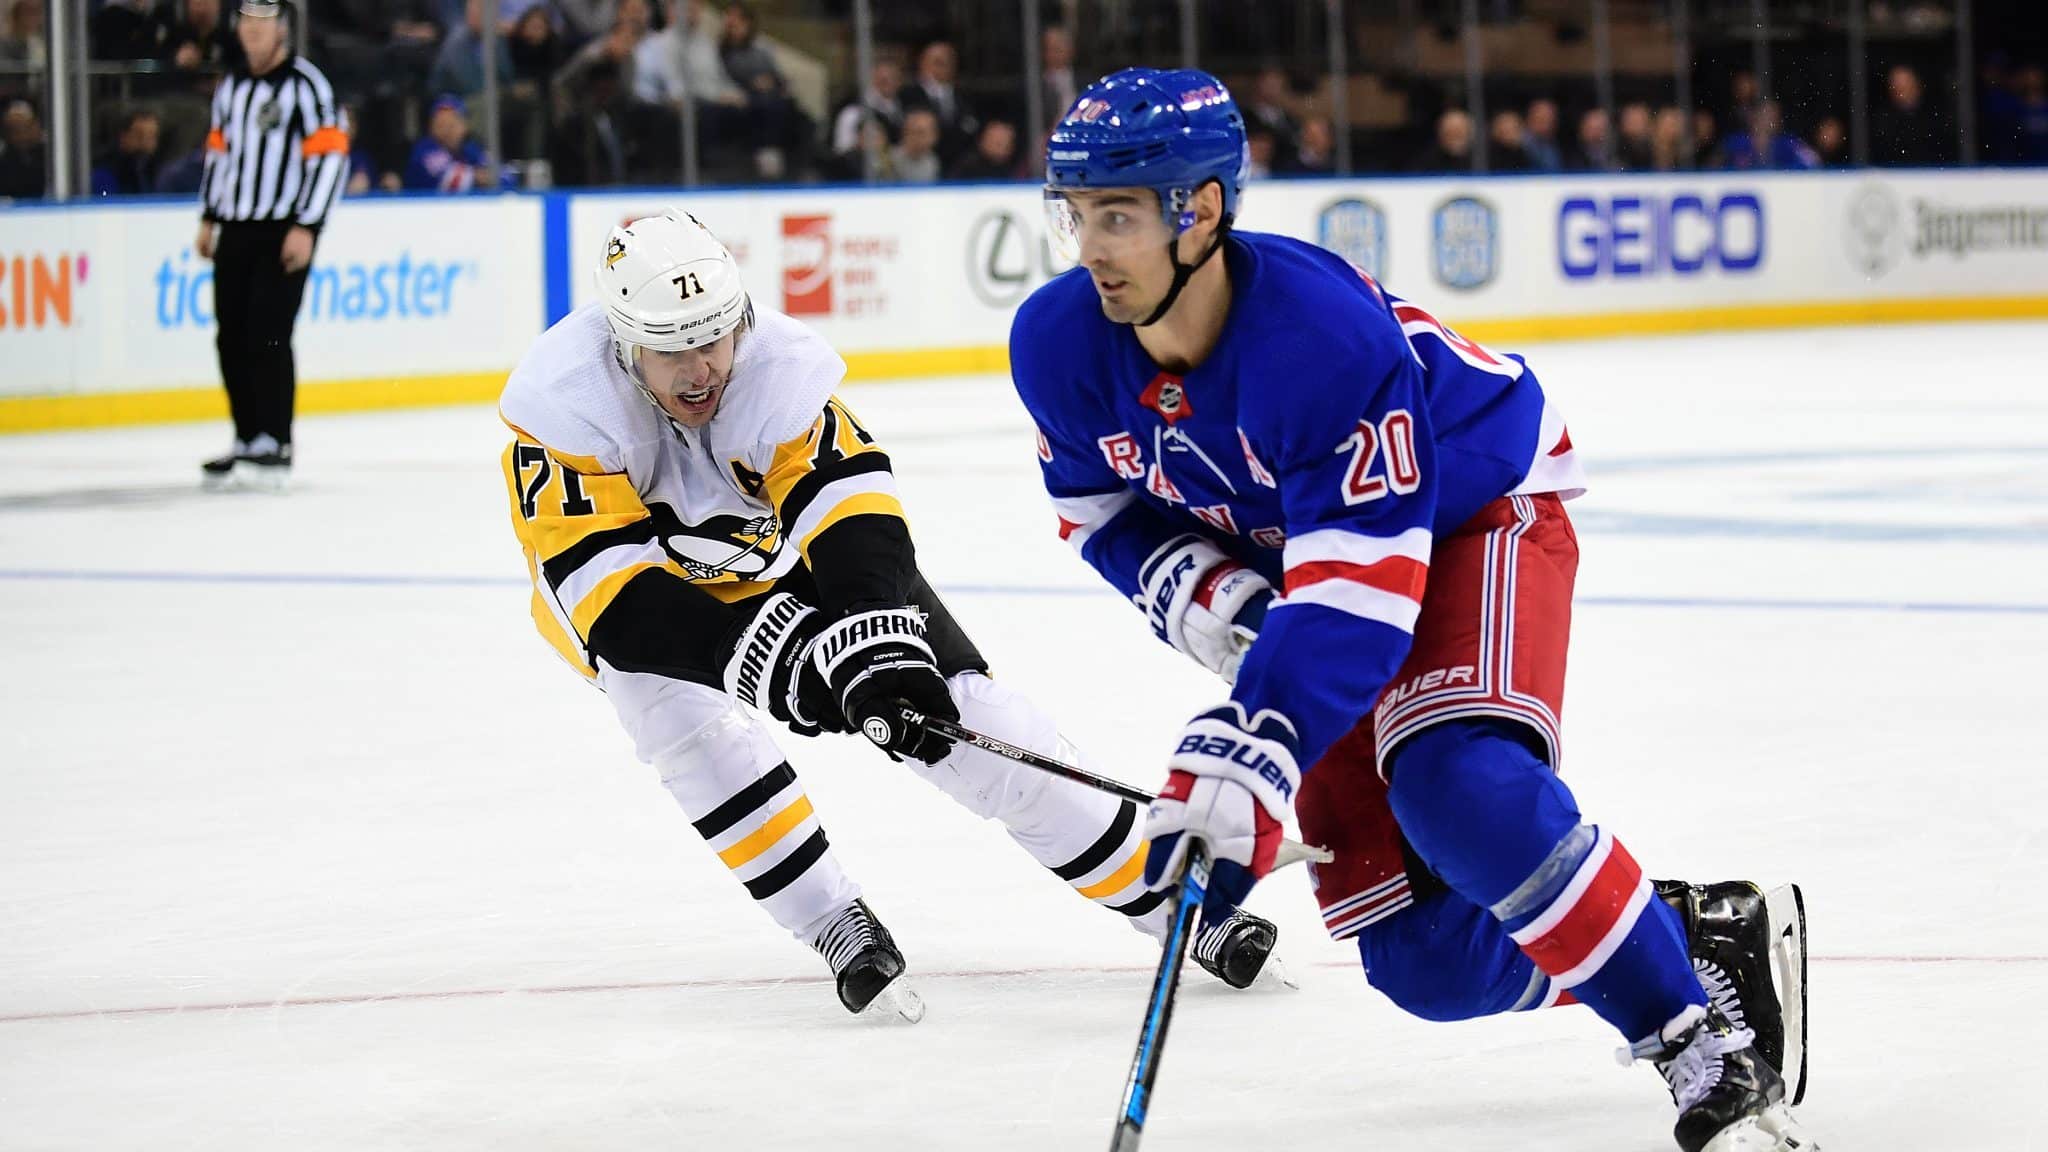 NEW YORK, NEW YORK - NOVEMBER 12: Chris Kreider #20 of the New York Rangers controls the puck with pressure from Evgeni Malkin #71 of the Pittsburgh Penguins during their game at Madison Square Garden on November 12, 2019 in New York City.